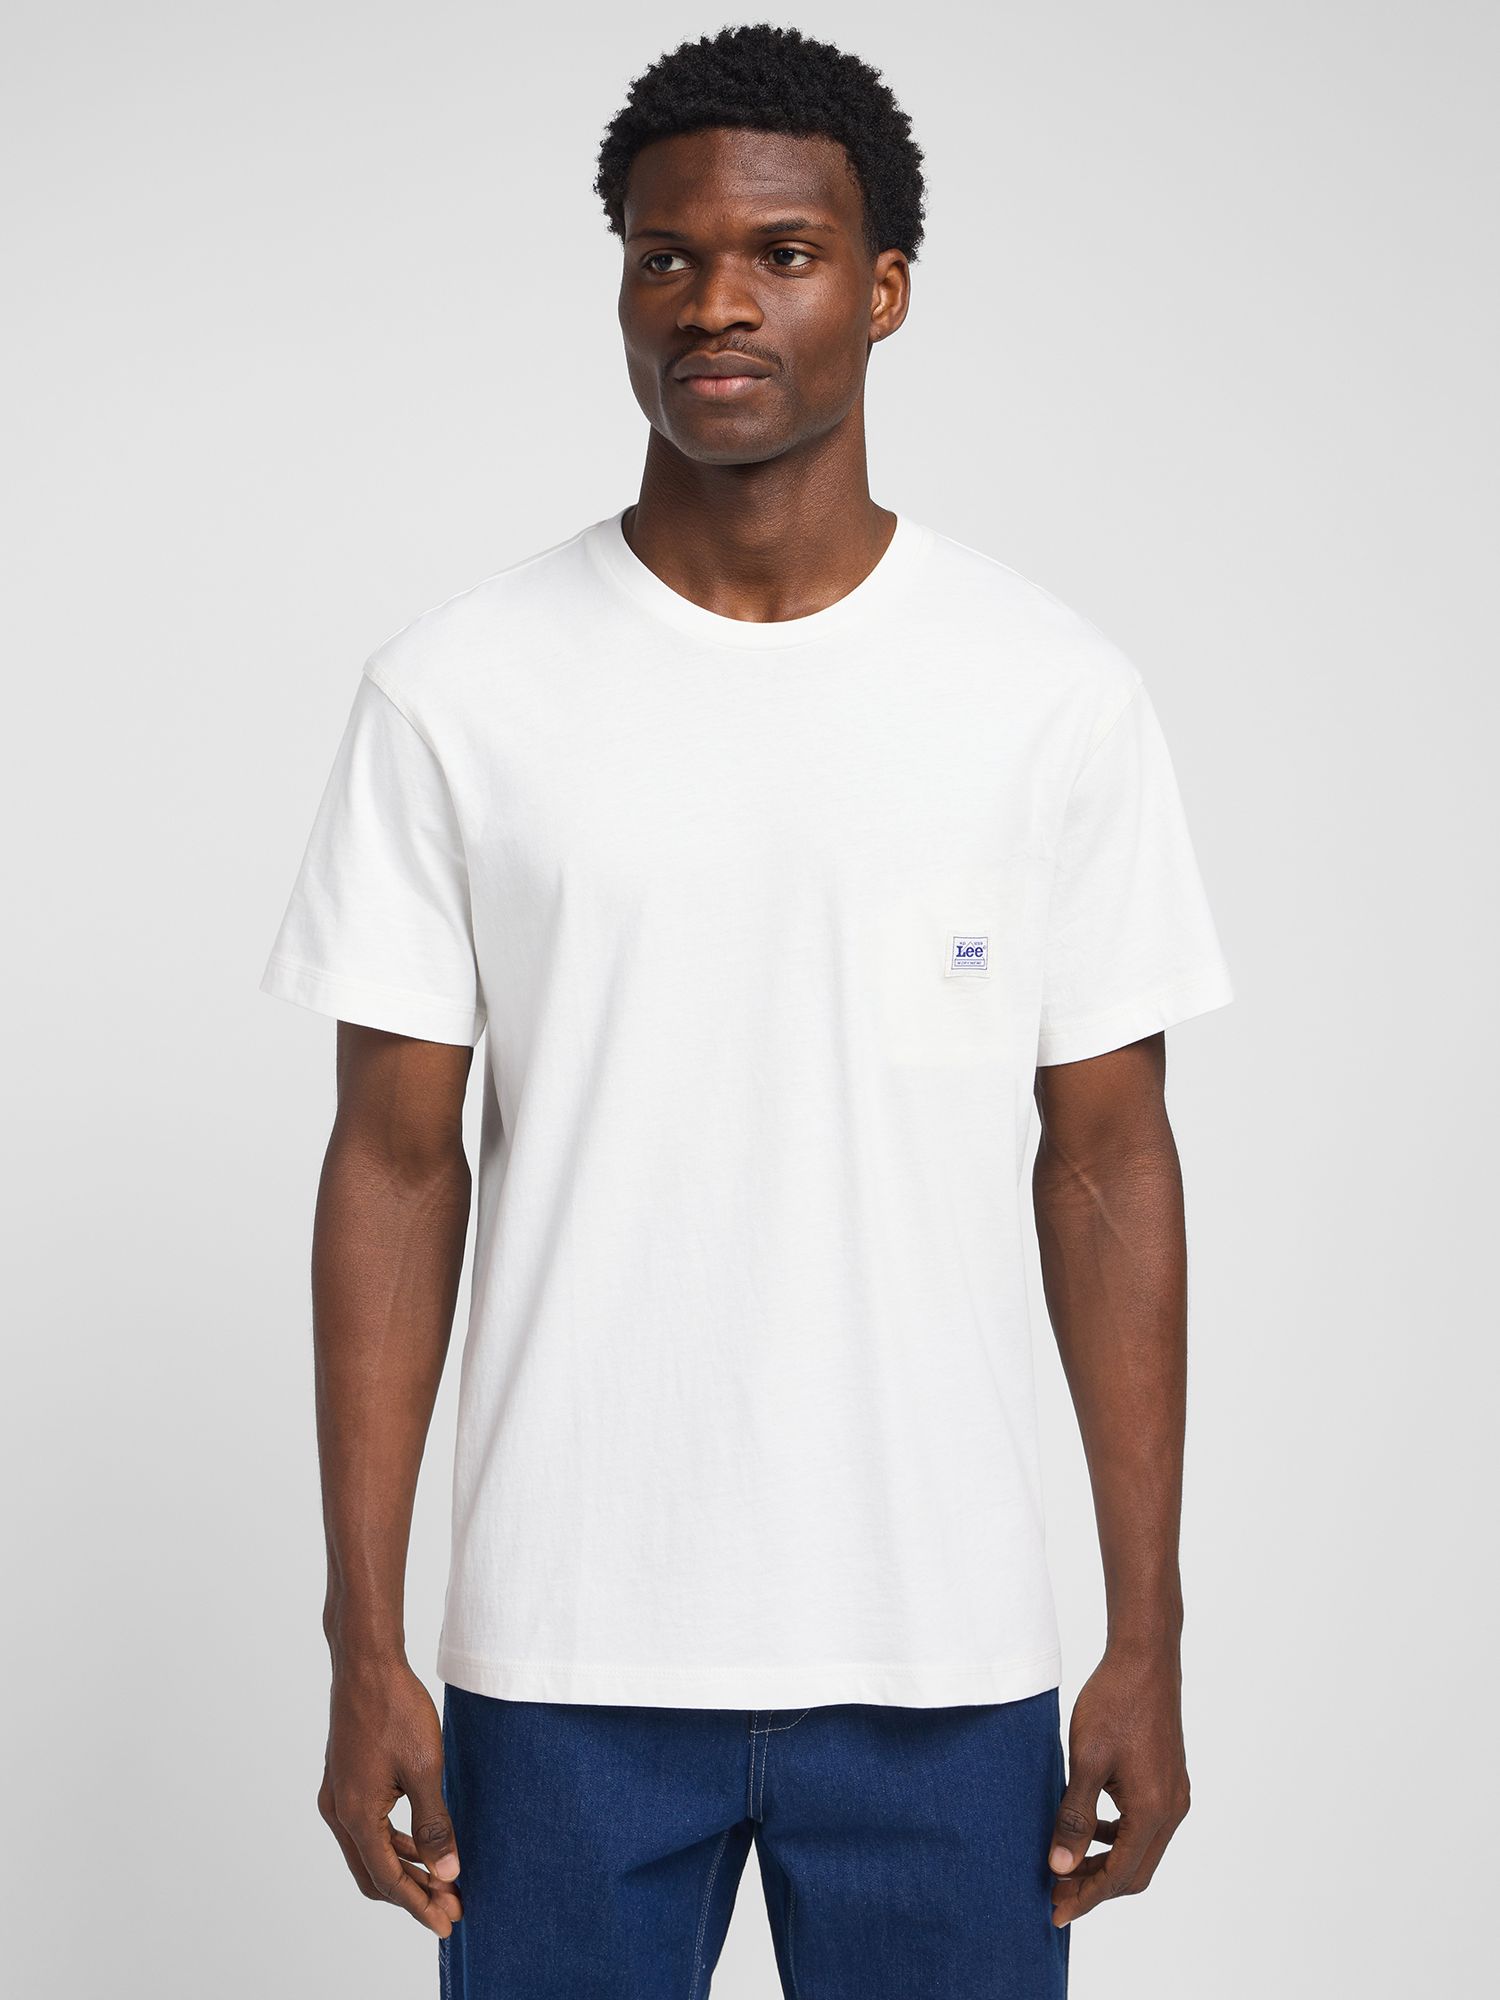 Buy Lee Cotton T-Shirt, Bright White Online at johnlewis.com